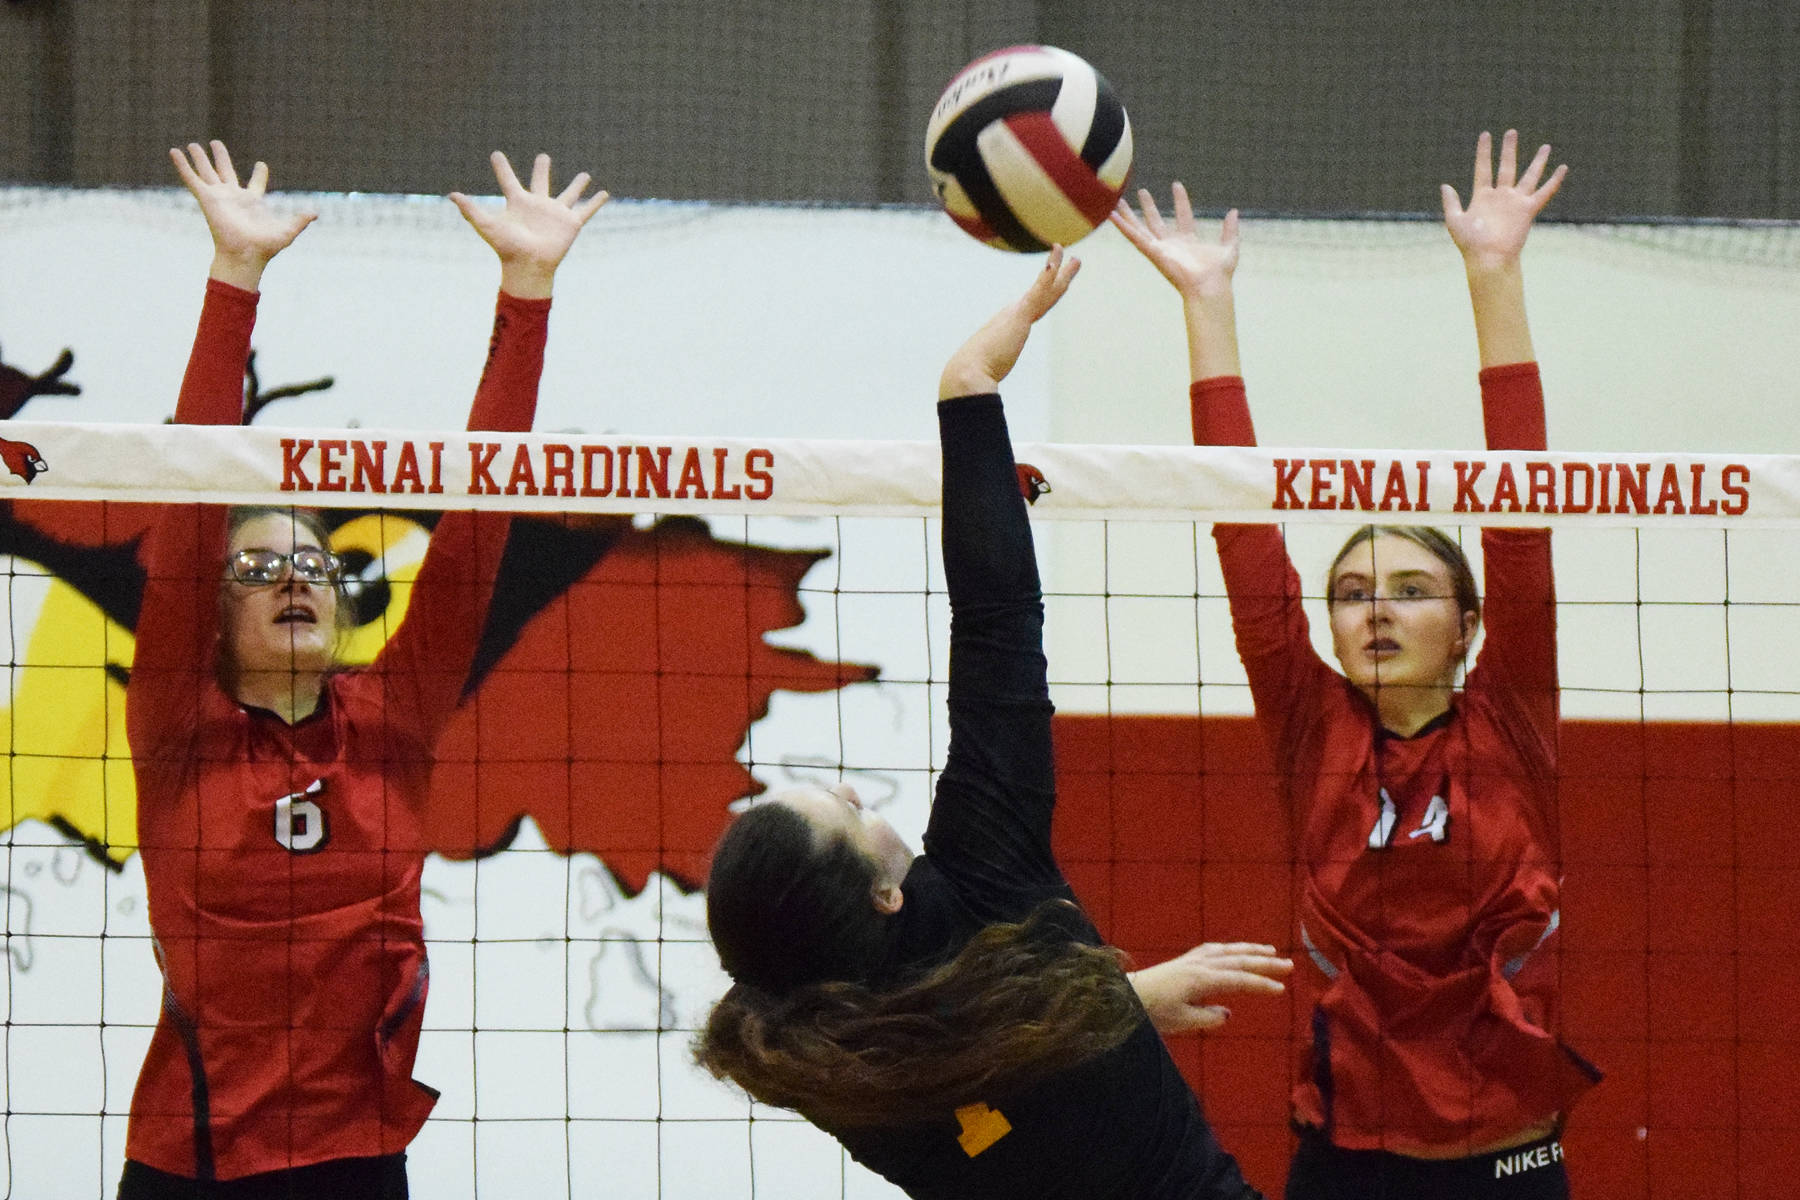 Peninsula volleyball teams roll at Dimond-Service tourney